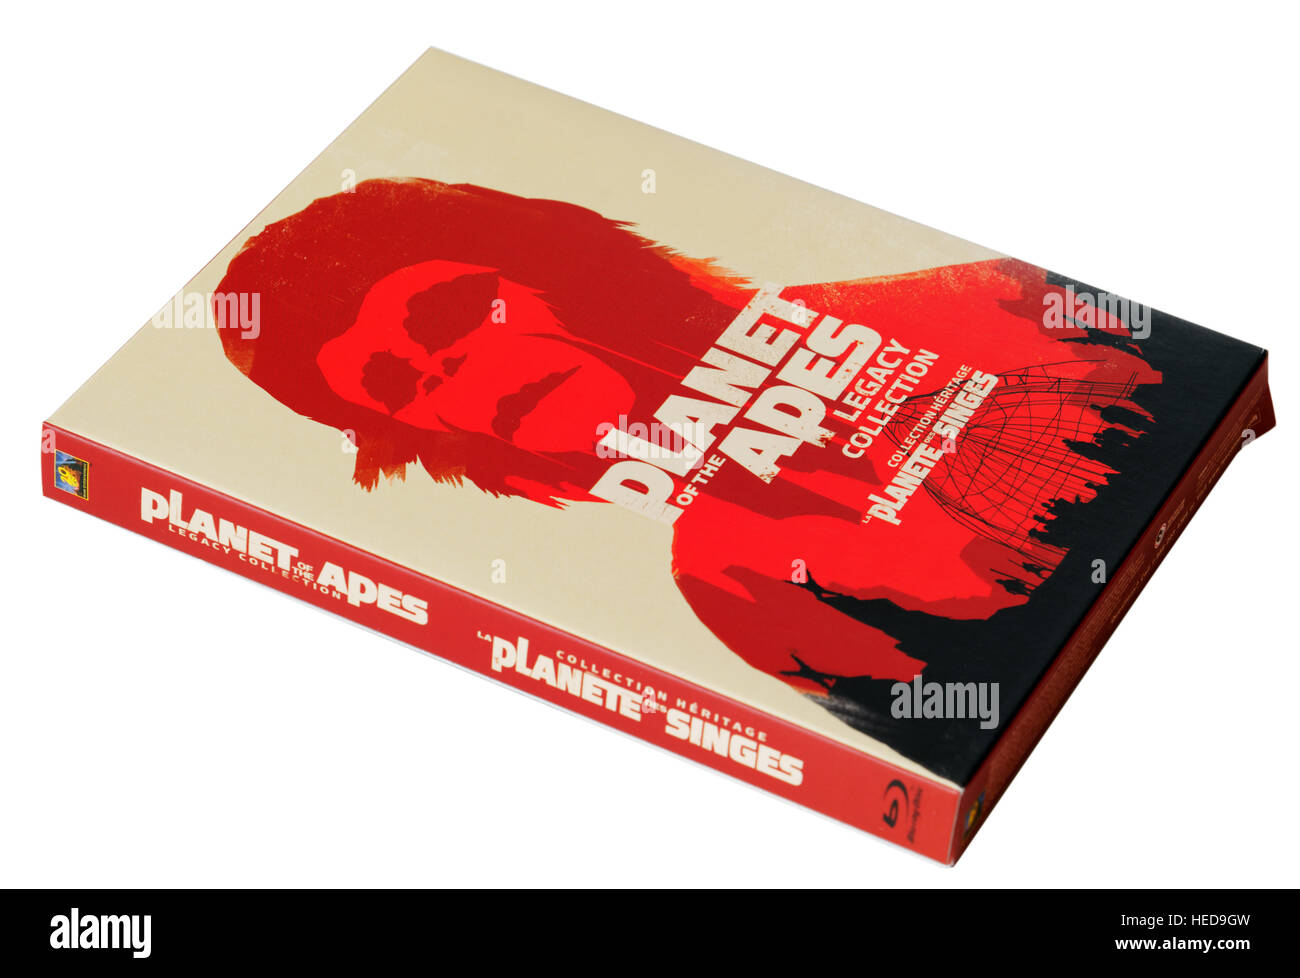 Planet of the Apes DVD (bilingual Canadian version with the french equivalent La Planete des Singes) Stock Photo